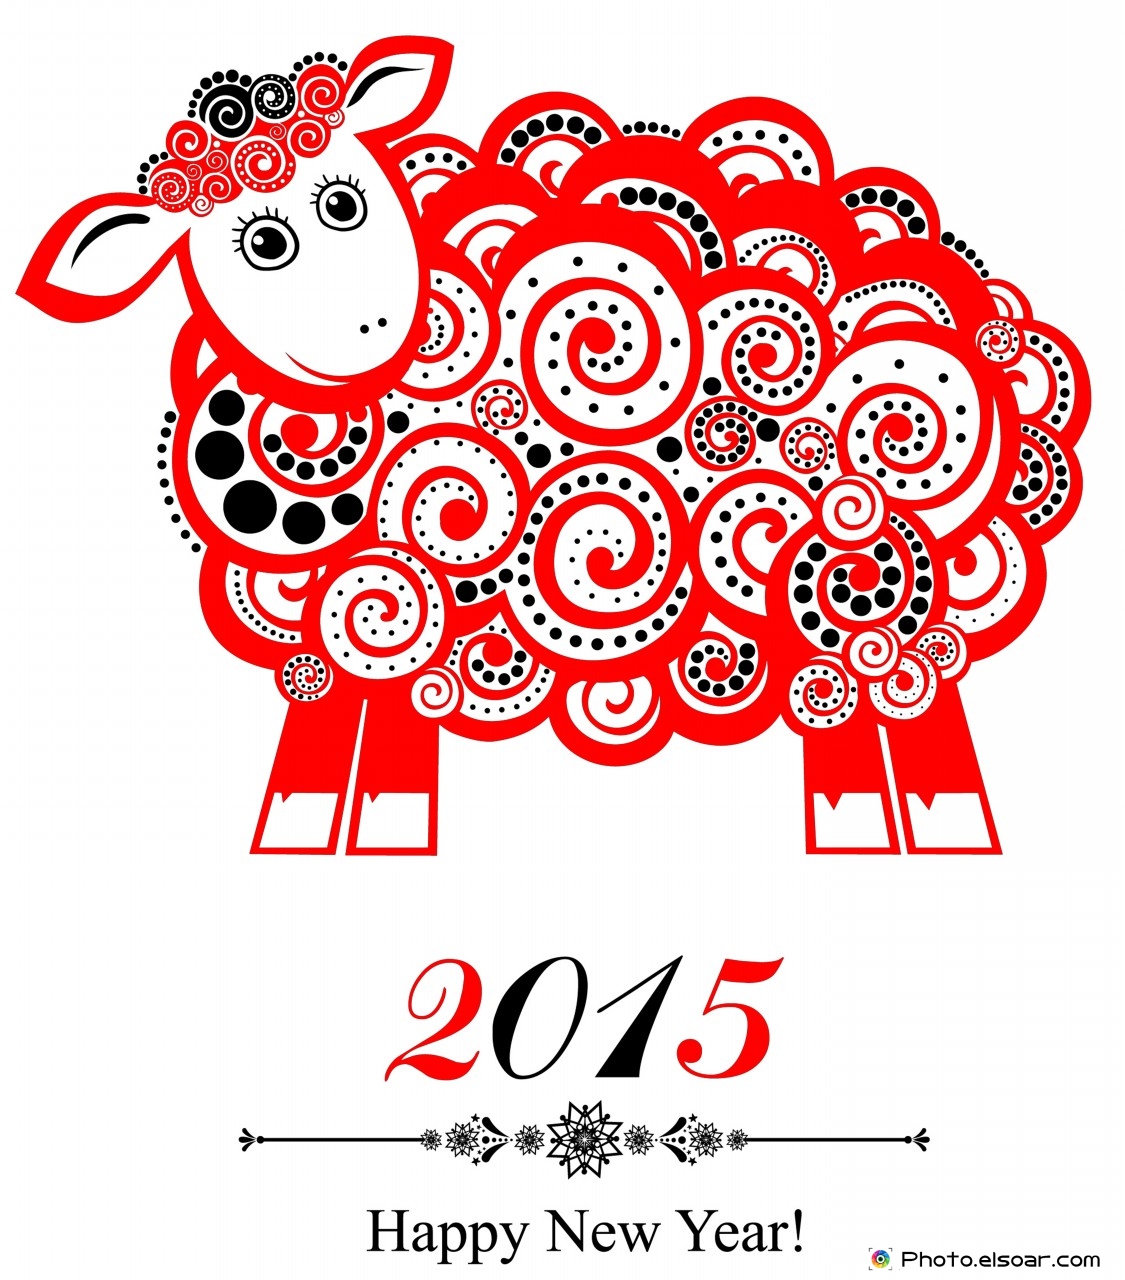 2015-new-year-card-with-red-sheep